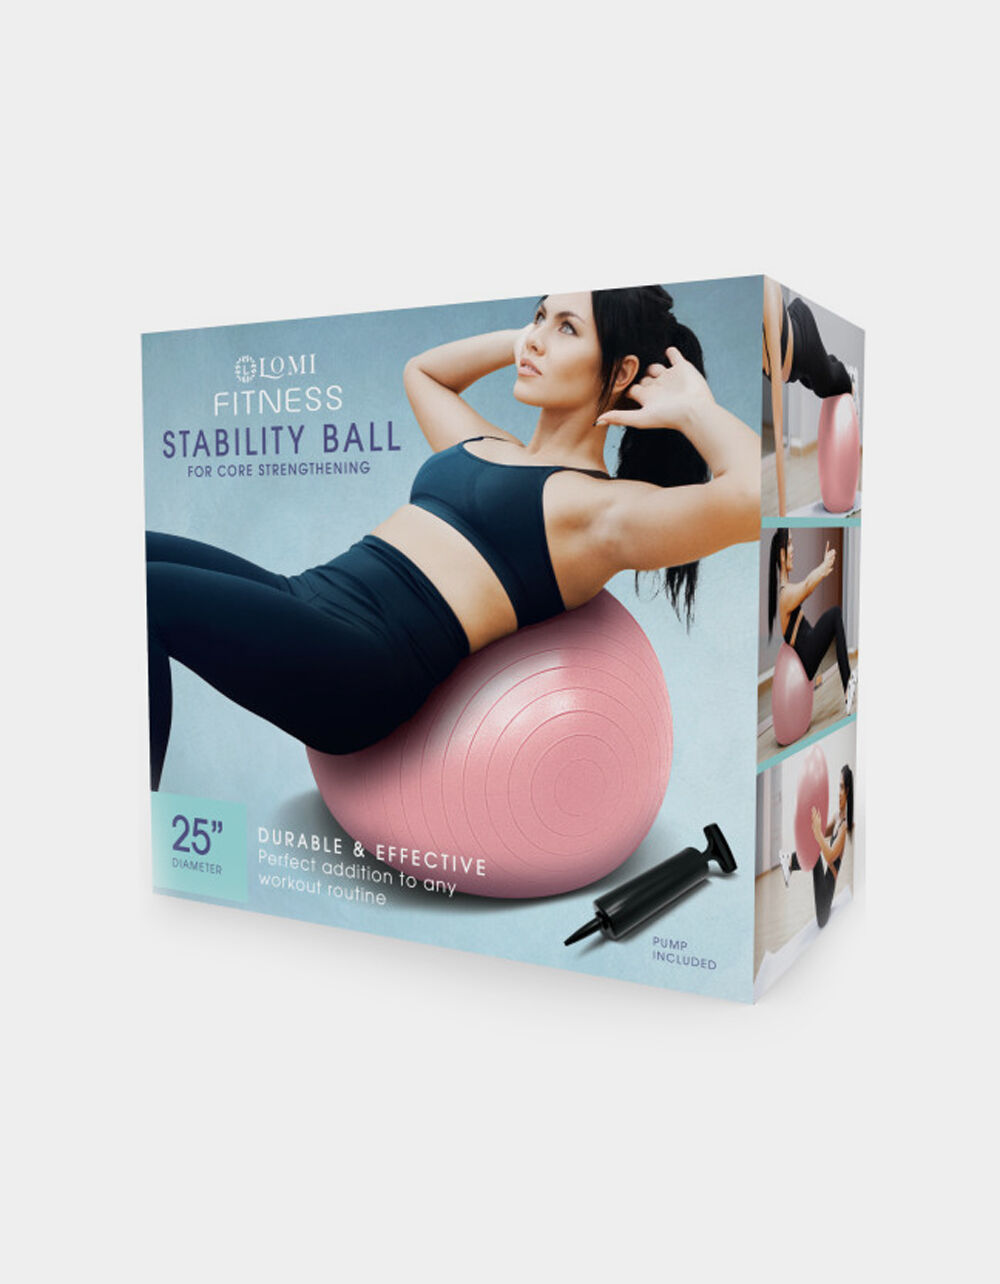 LOMI Fitness Stability Ball - PINK